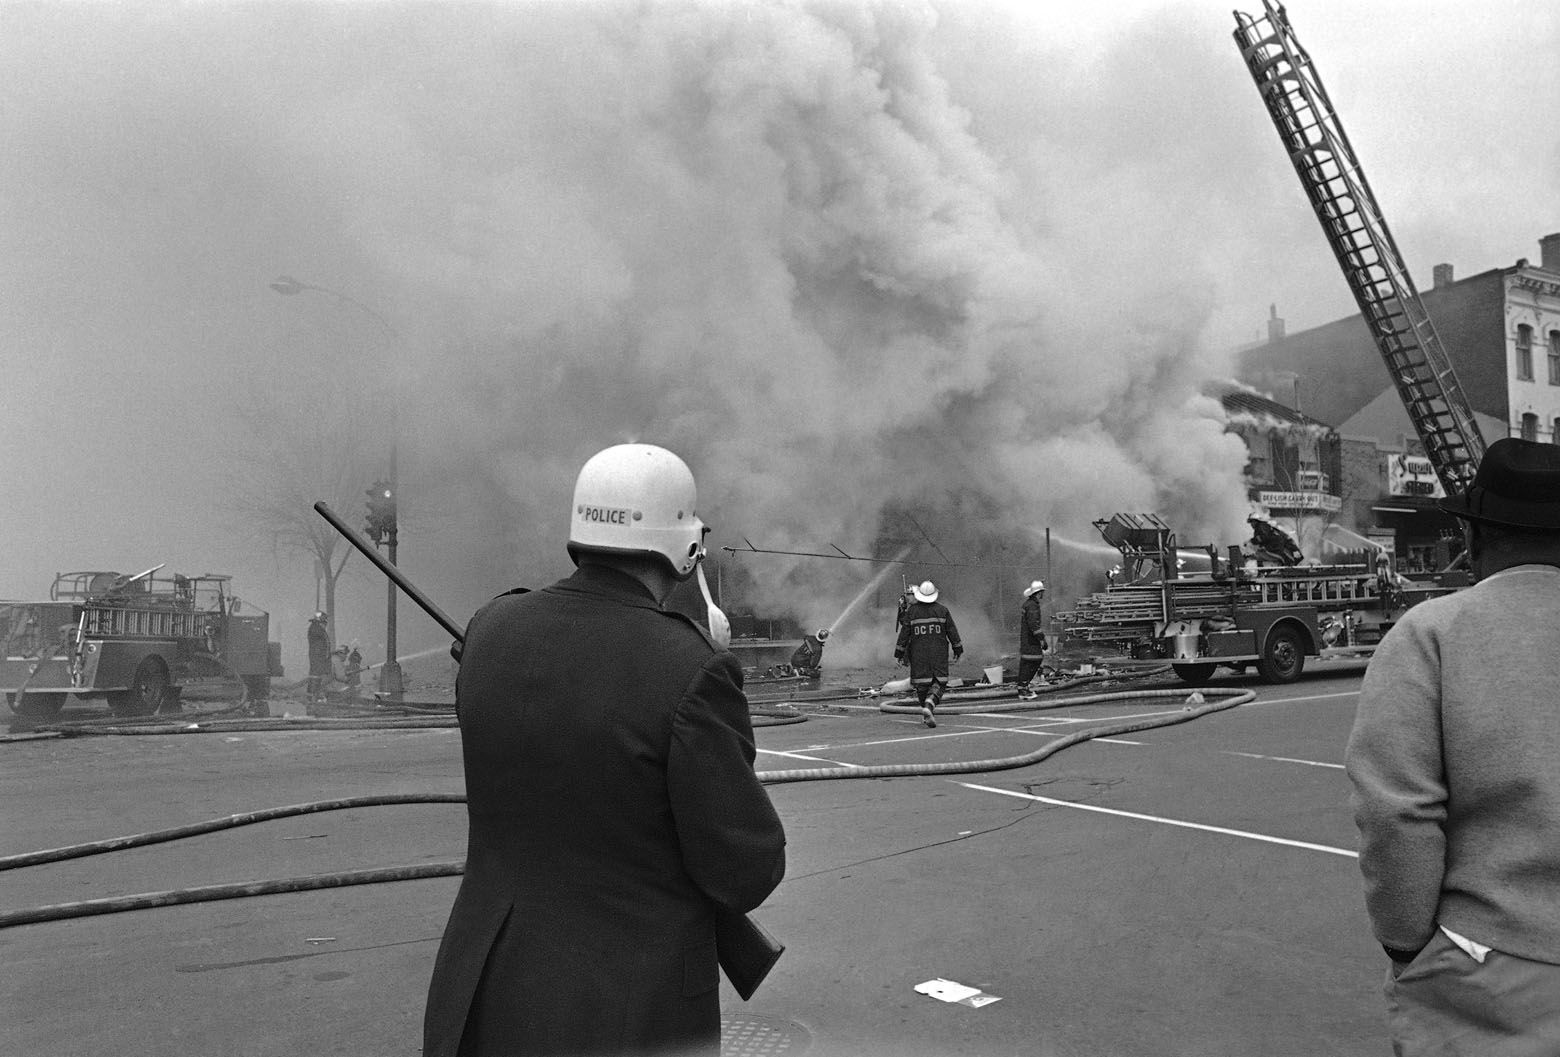 Police stand guard as firemen battle fires in the troubled area of the Capital, Washington, April 6, 1968. The trouble erupted following a night when a curfew was imposed and most burning and looting had subsided. (AP Photo/Charles Tasnadi)